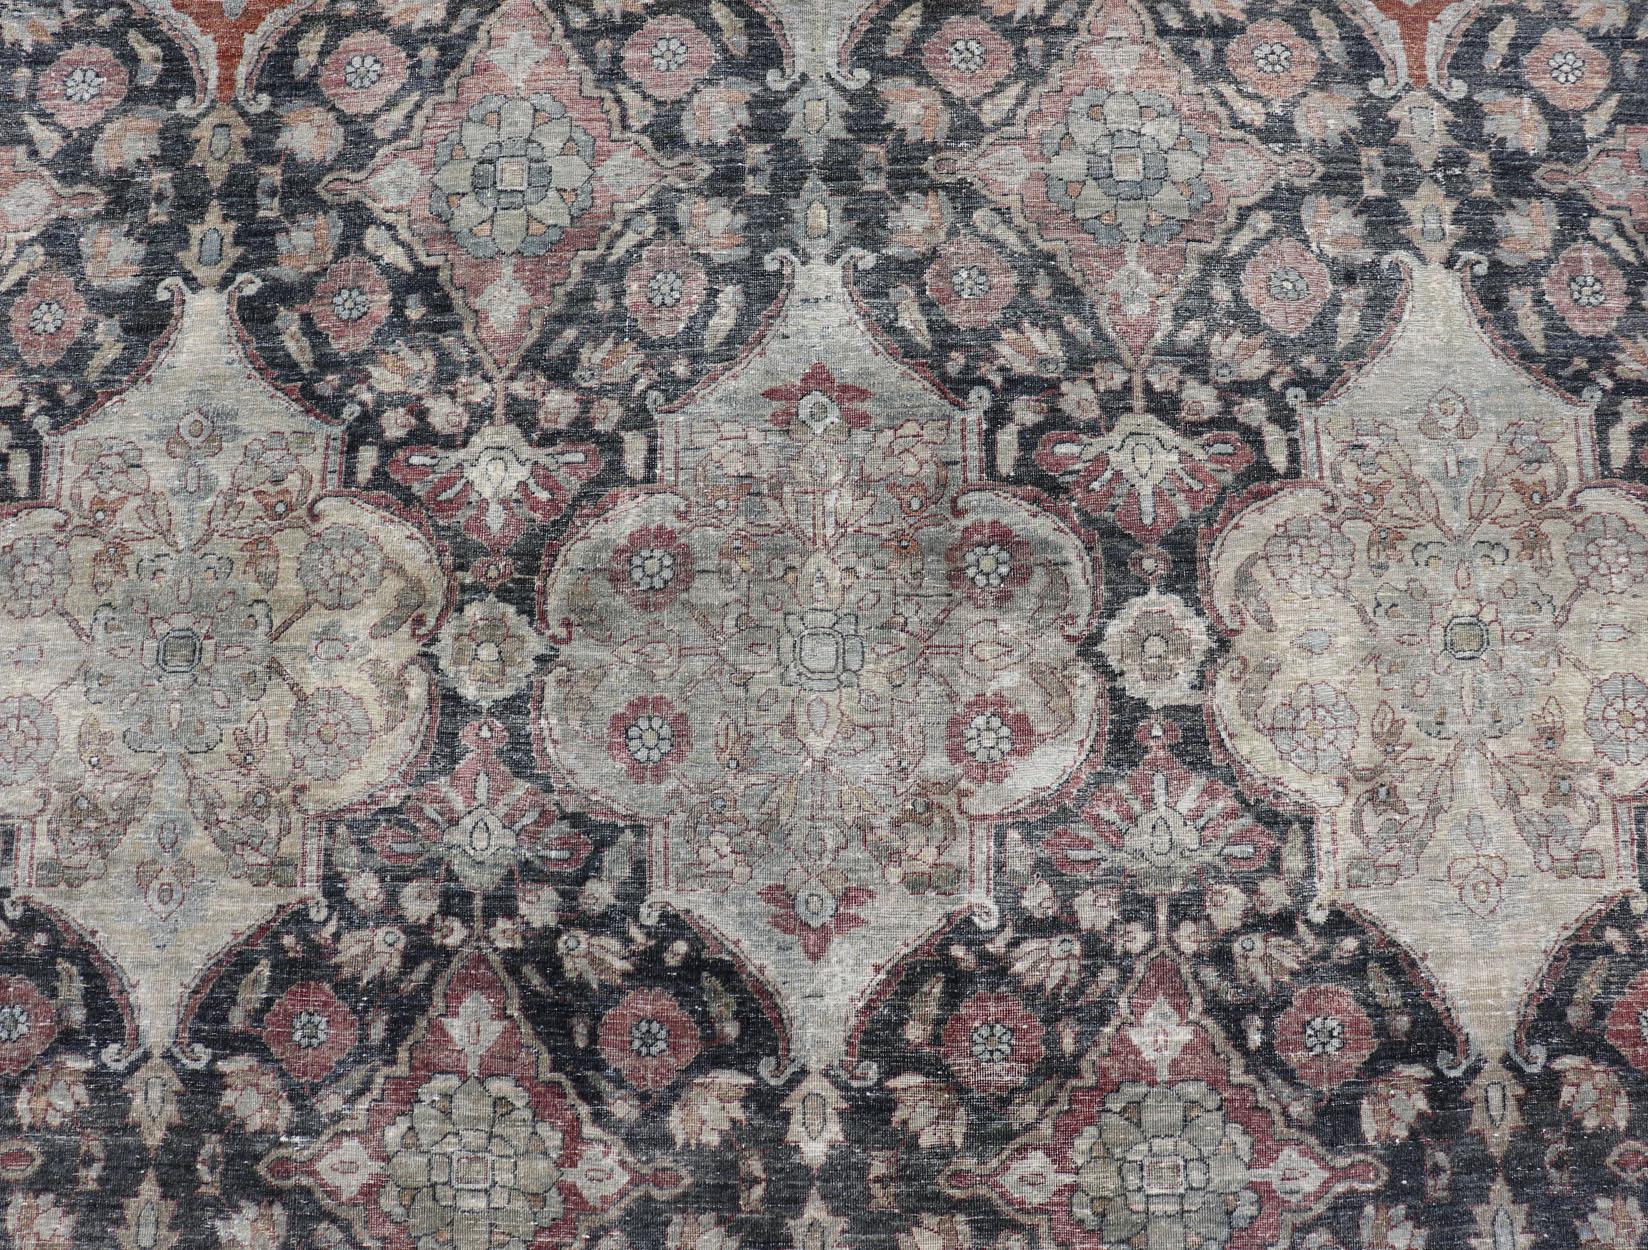 Wool Antique Destressed Persian Yazd Rug in Charcoal, Copper, Warm Gray, Taupe & Rose For Sale